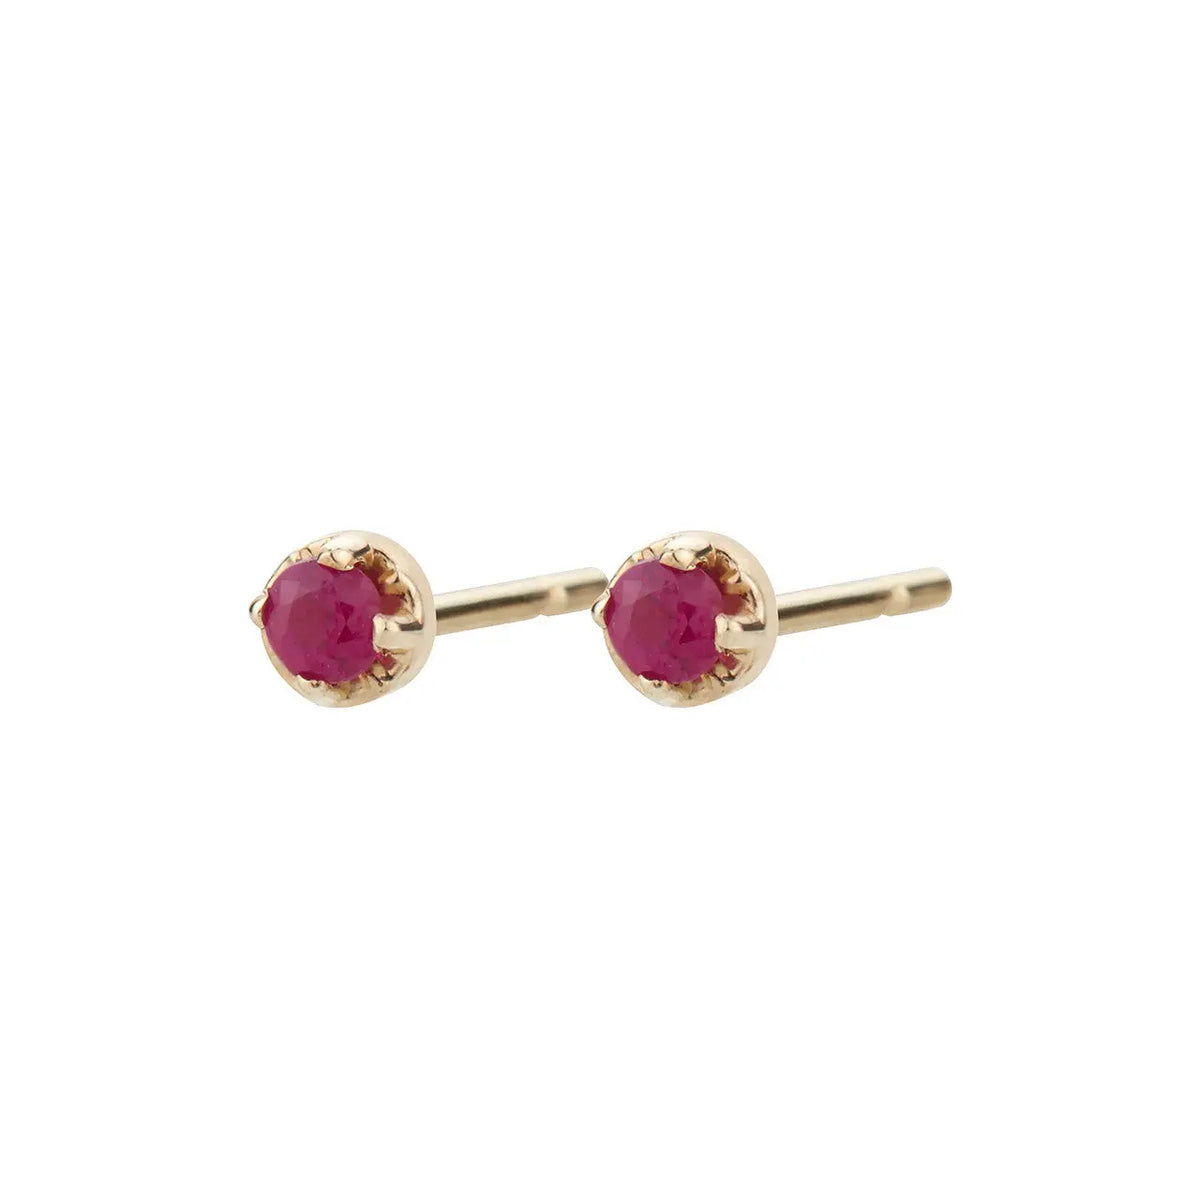 Sparkling rubies set in 14k yellow gold prongs. Dainty and delicate.   14k yellow gold earrings  Aili Jewelry is made in New York City from recycled metals provided by sustainable certified companies and conflict free diamonds.